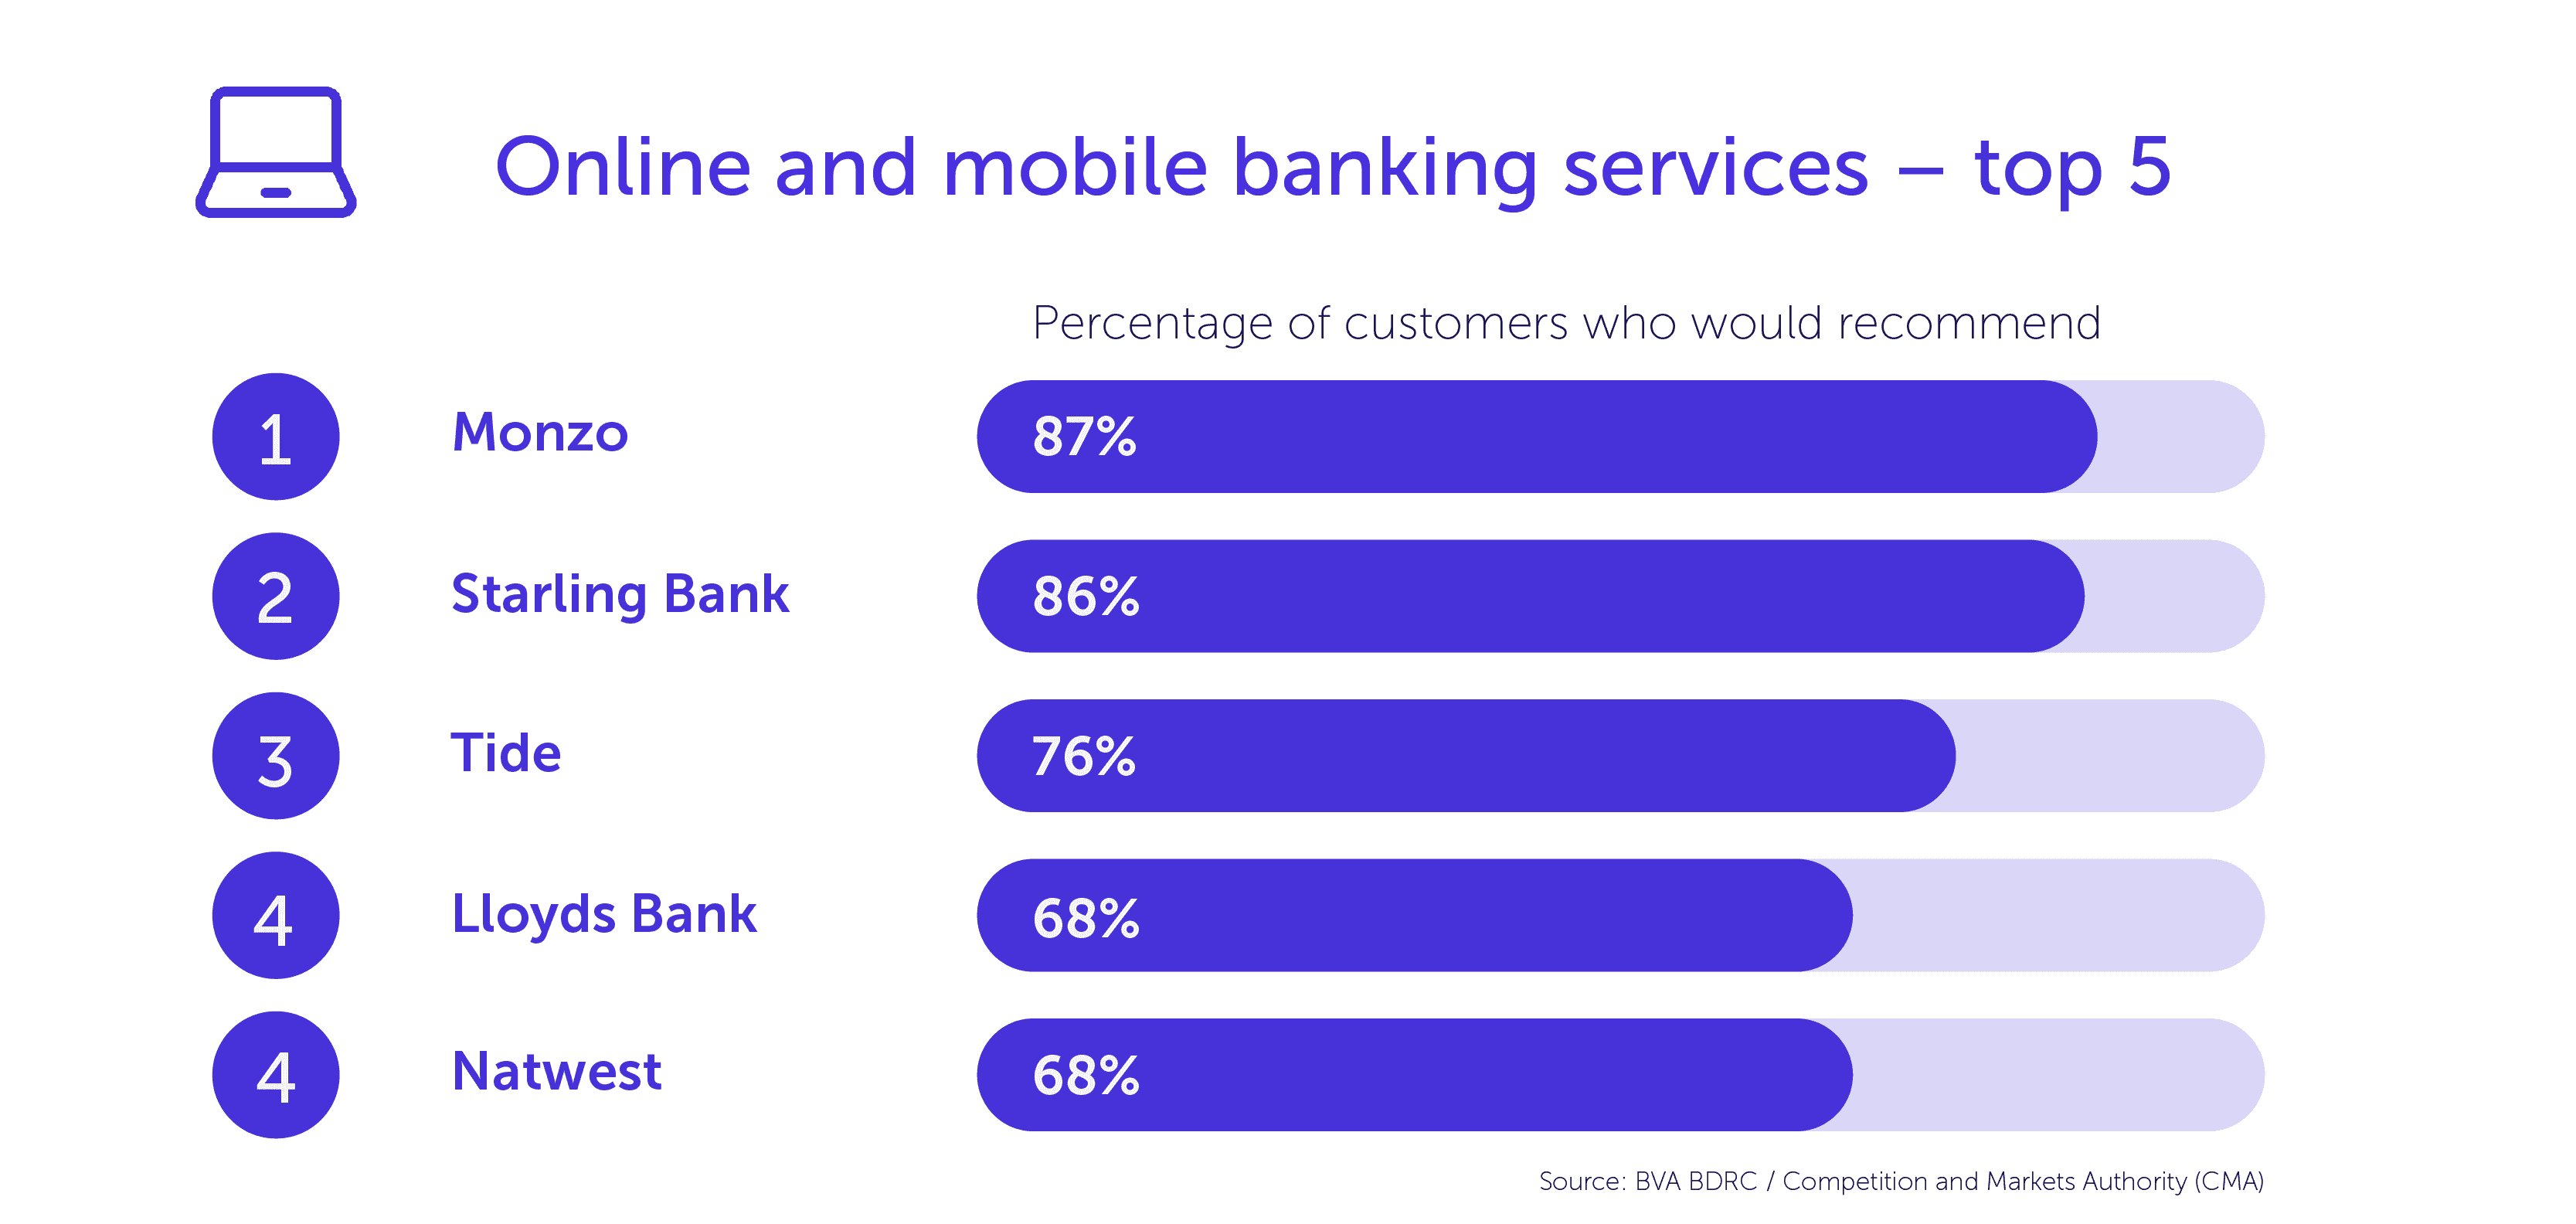 Top 5 banks for online and mobile banking